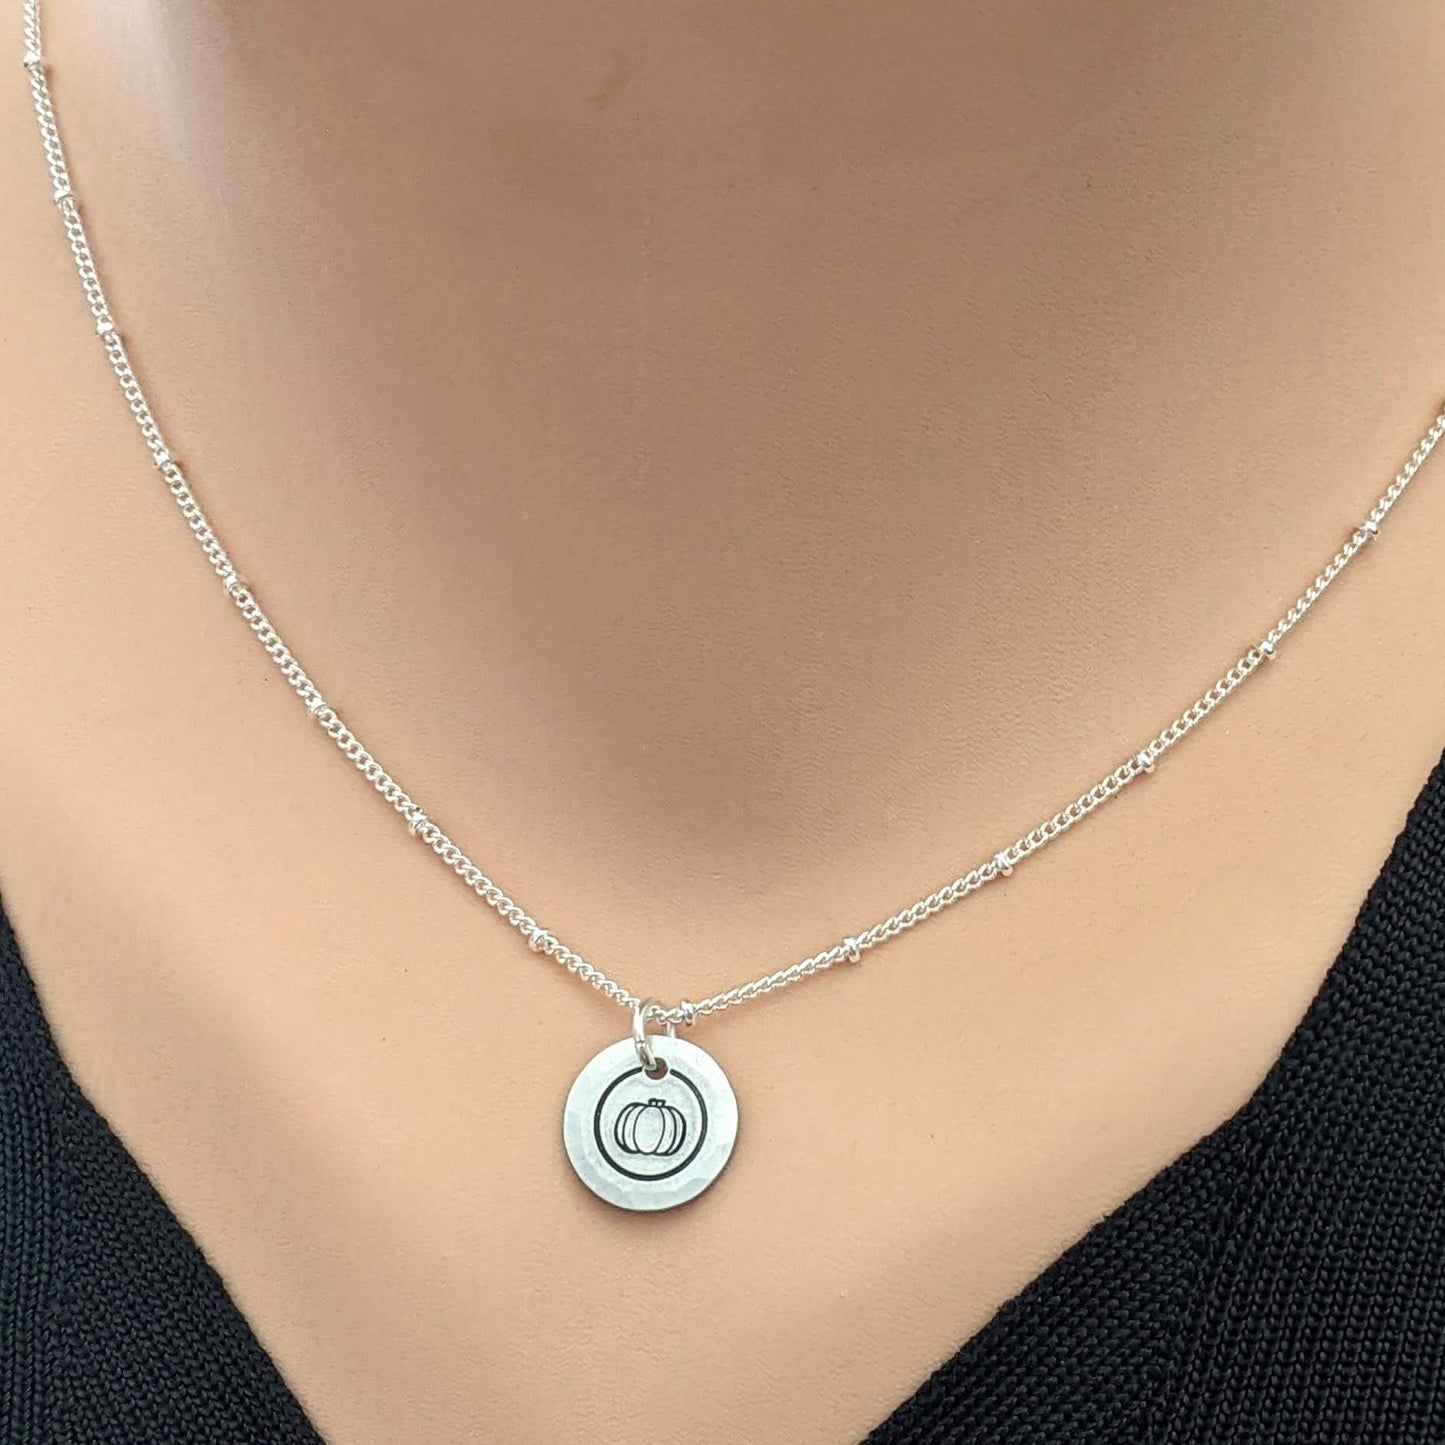 Pumpkin Circle Necklace - Gold or Silver Satellite Chain